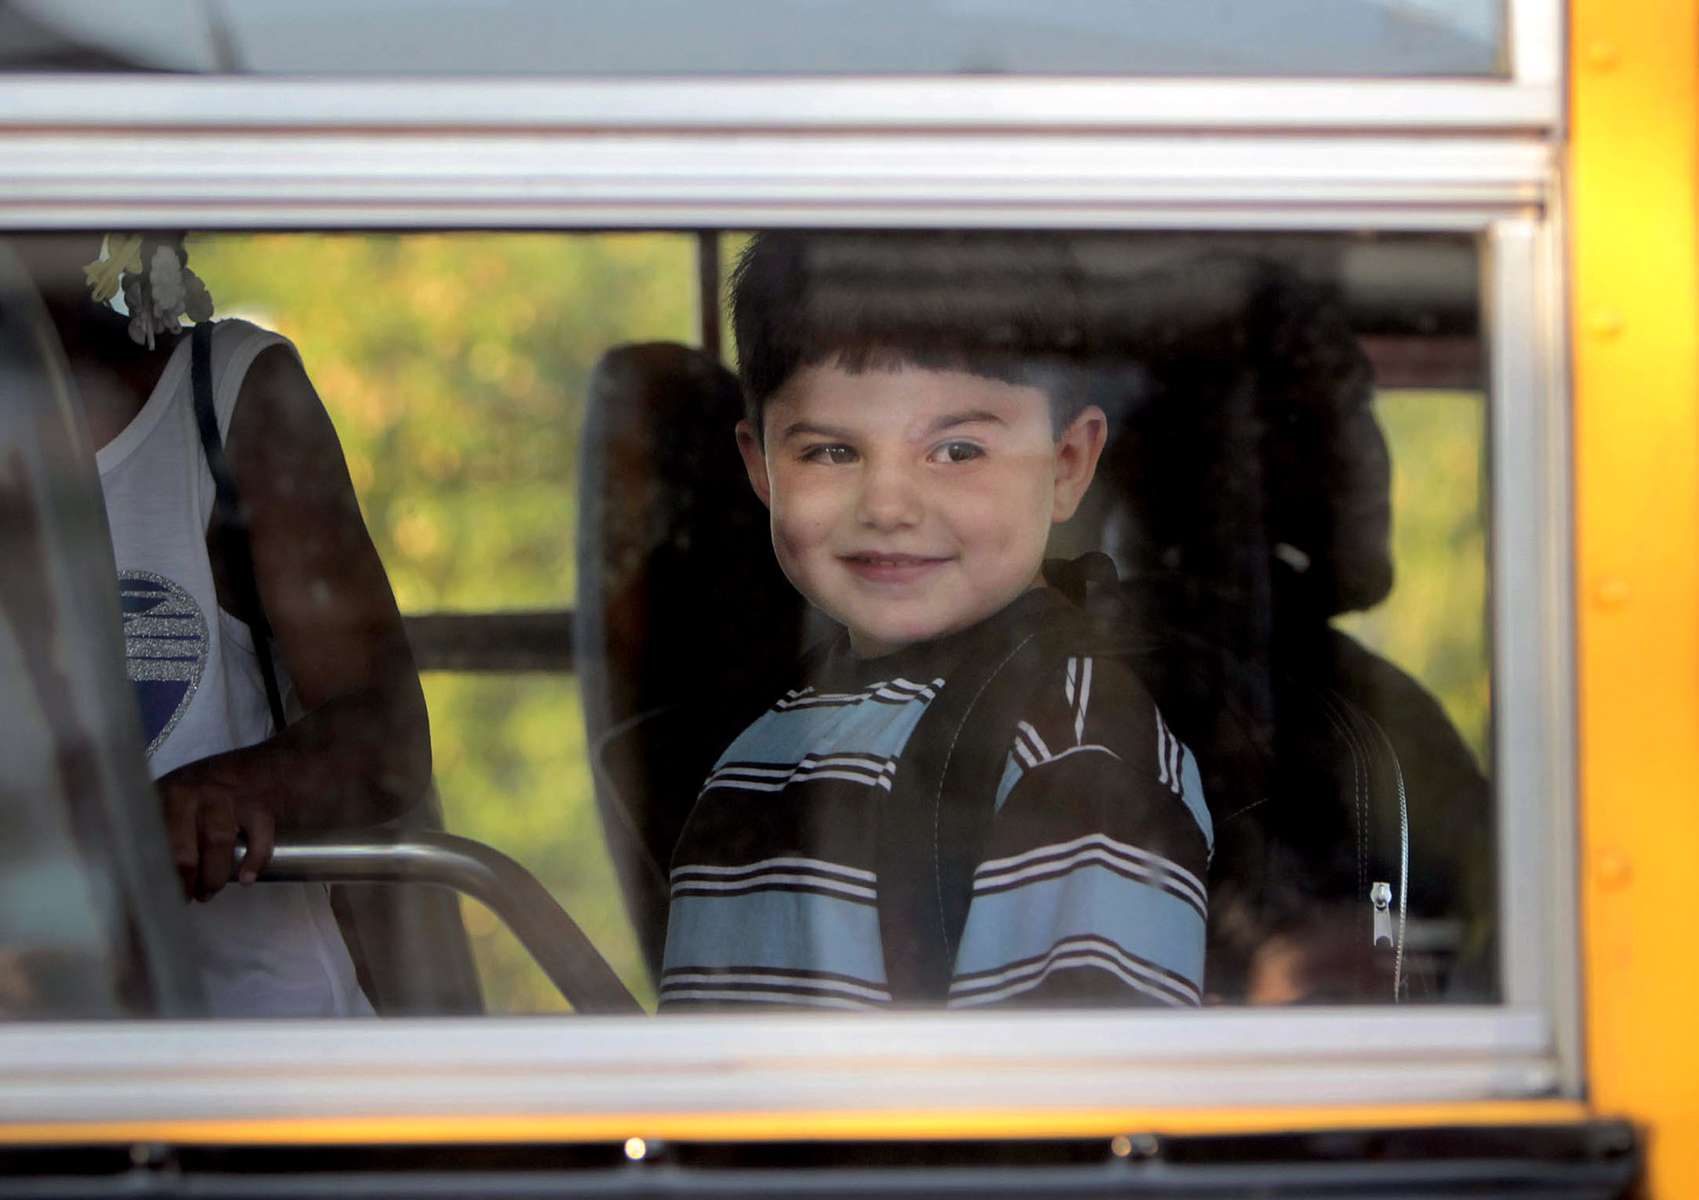 Izzy boards a school bus on his first day of school, smiling out the window at his mother. Jennifer has signed the child up as a male, and has been working with the school district to educate them on transgender issues and been very happy with the reception so far.